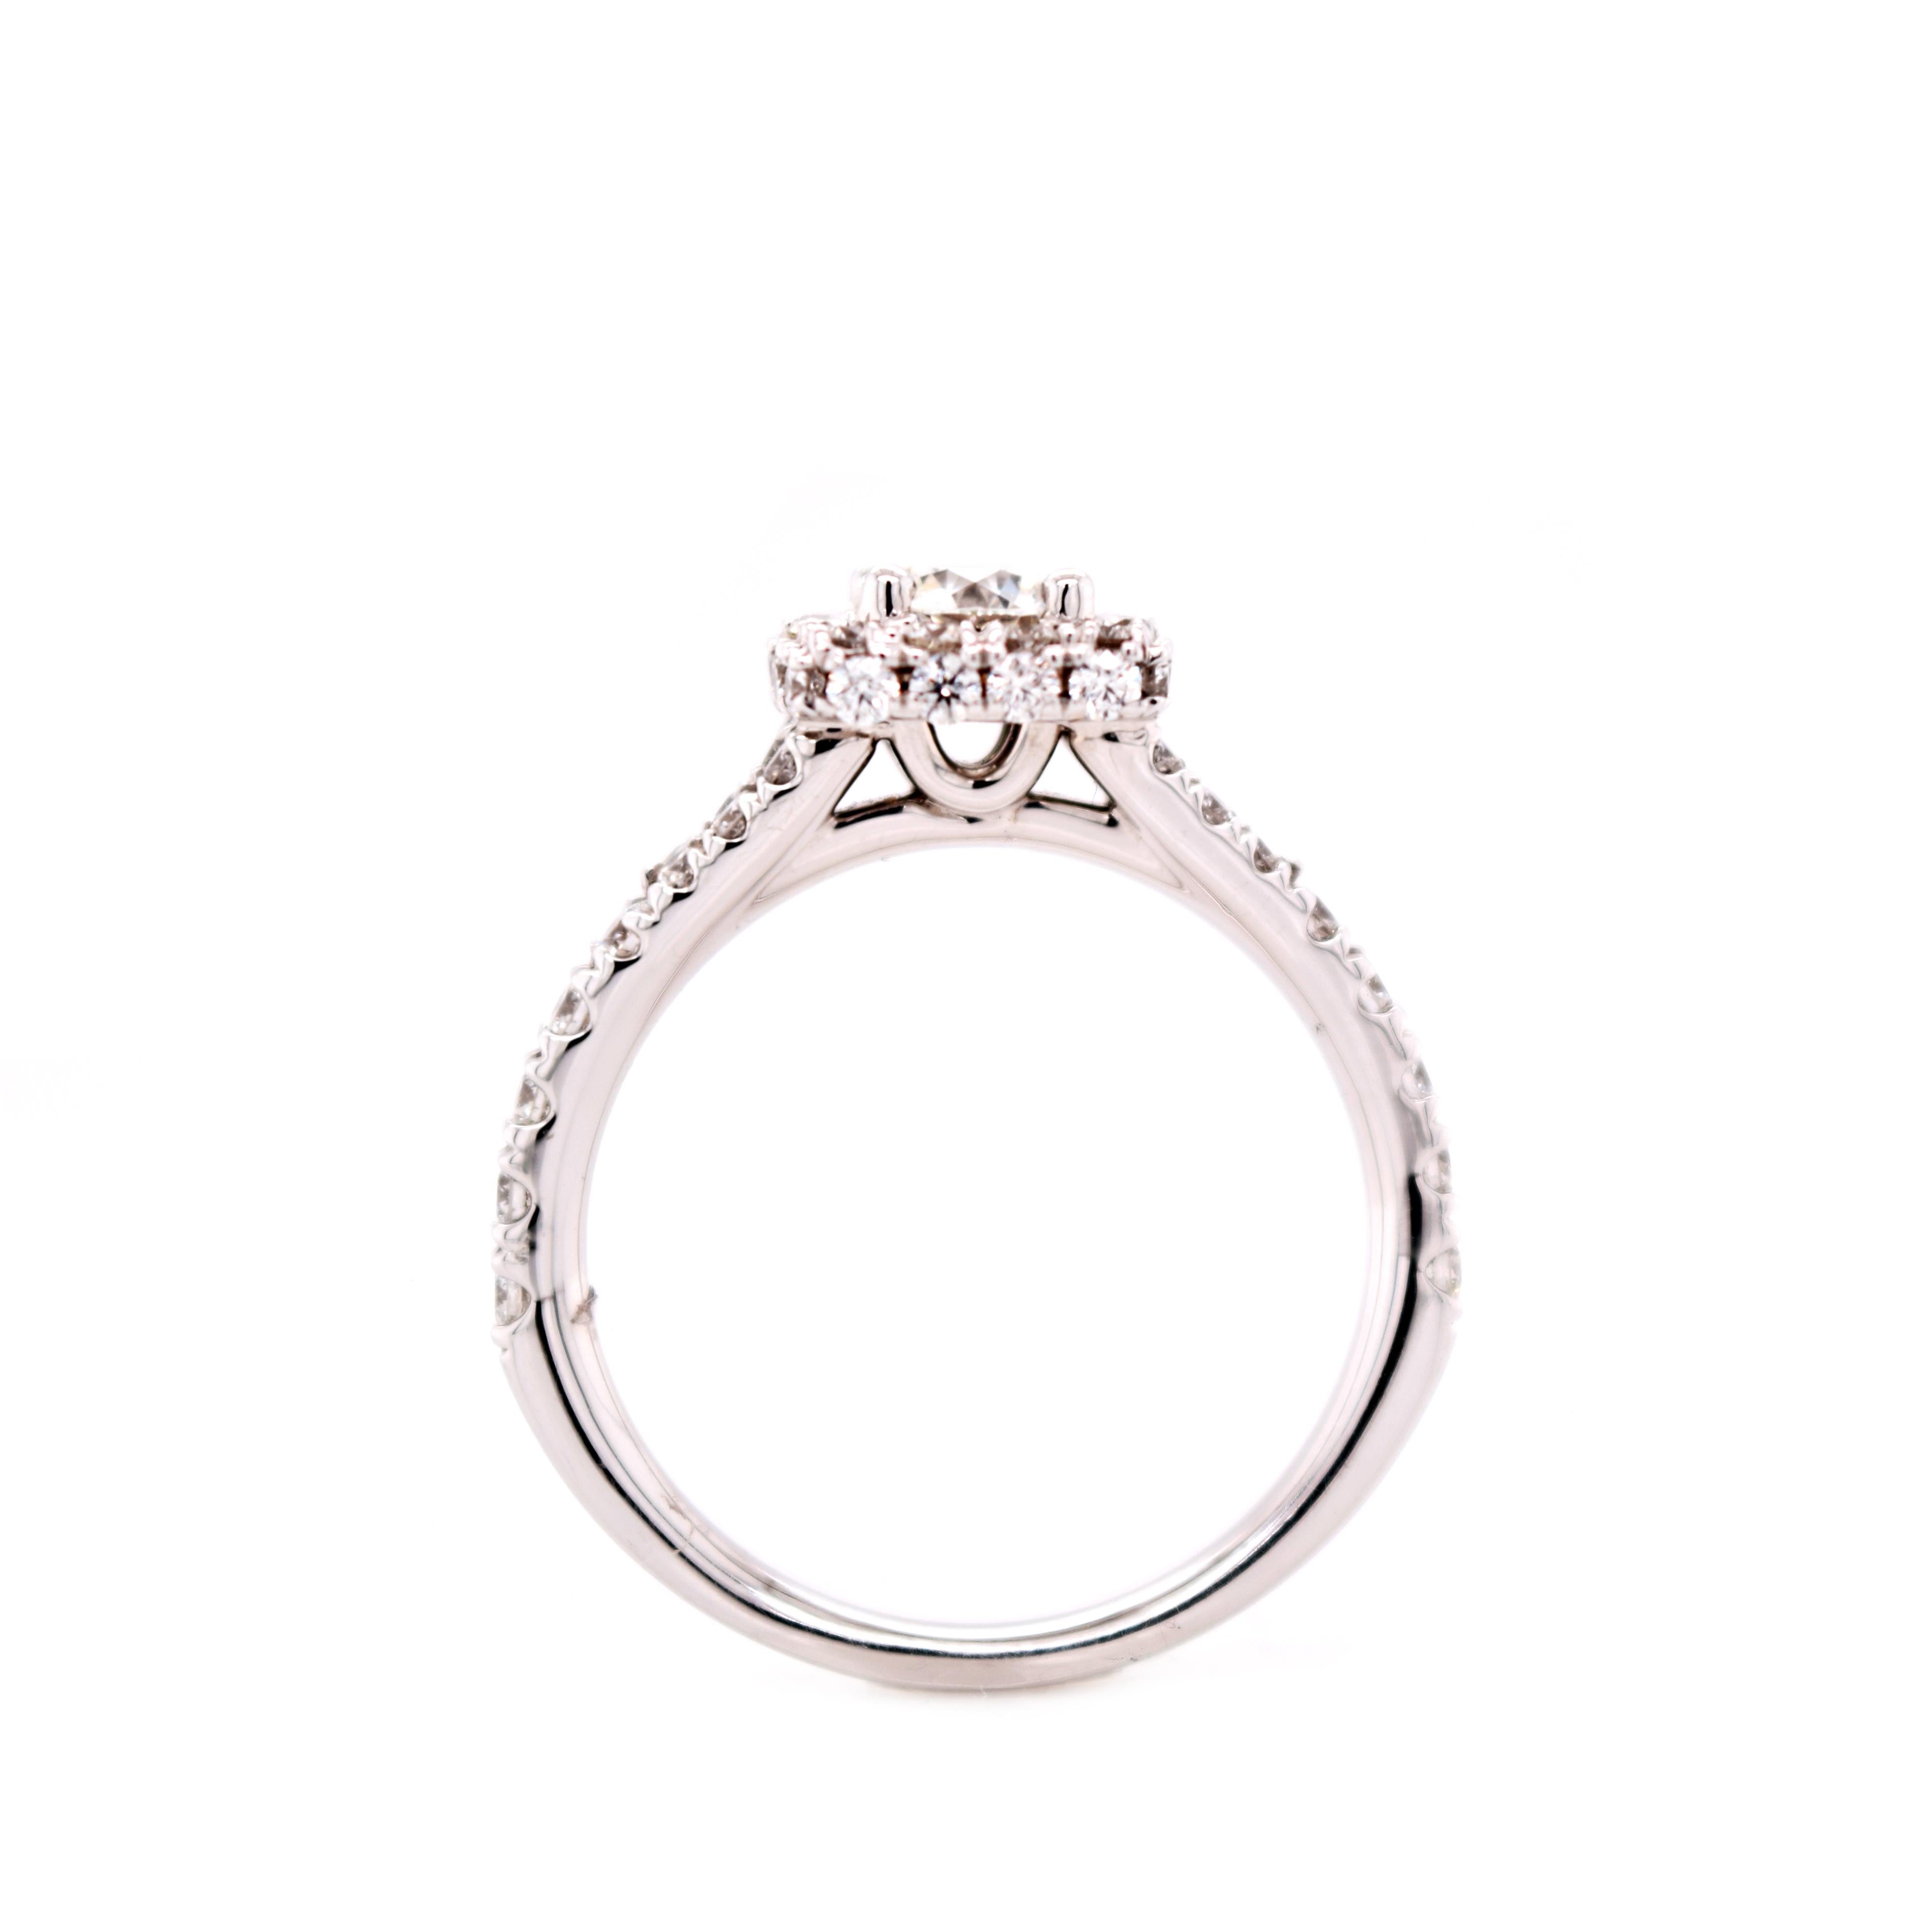 A Hearts on Fire diamond is perfectly cut to allow your diamond to have the best light return. It shimmers even in dim light.
18 Karat white gold setting with slightly split shank with a square halo. 

.515  H/VS1 Center  Hearts on Fire Diamond